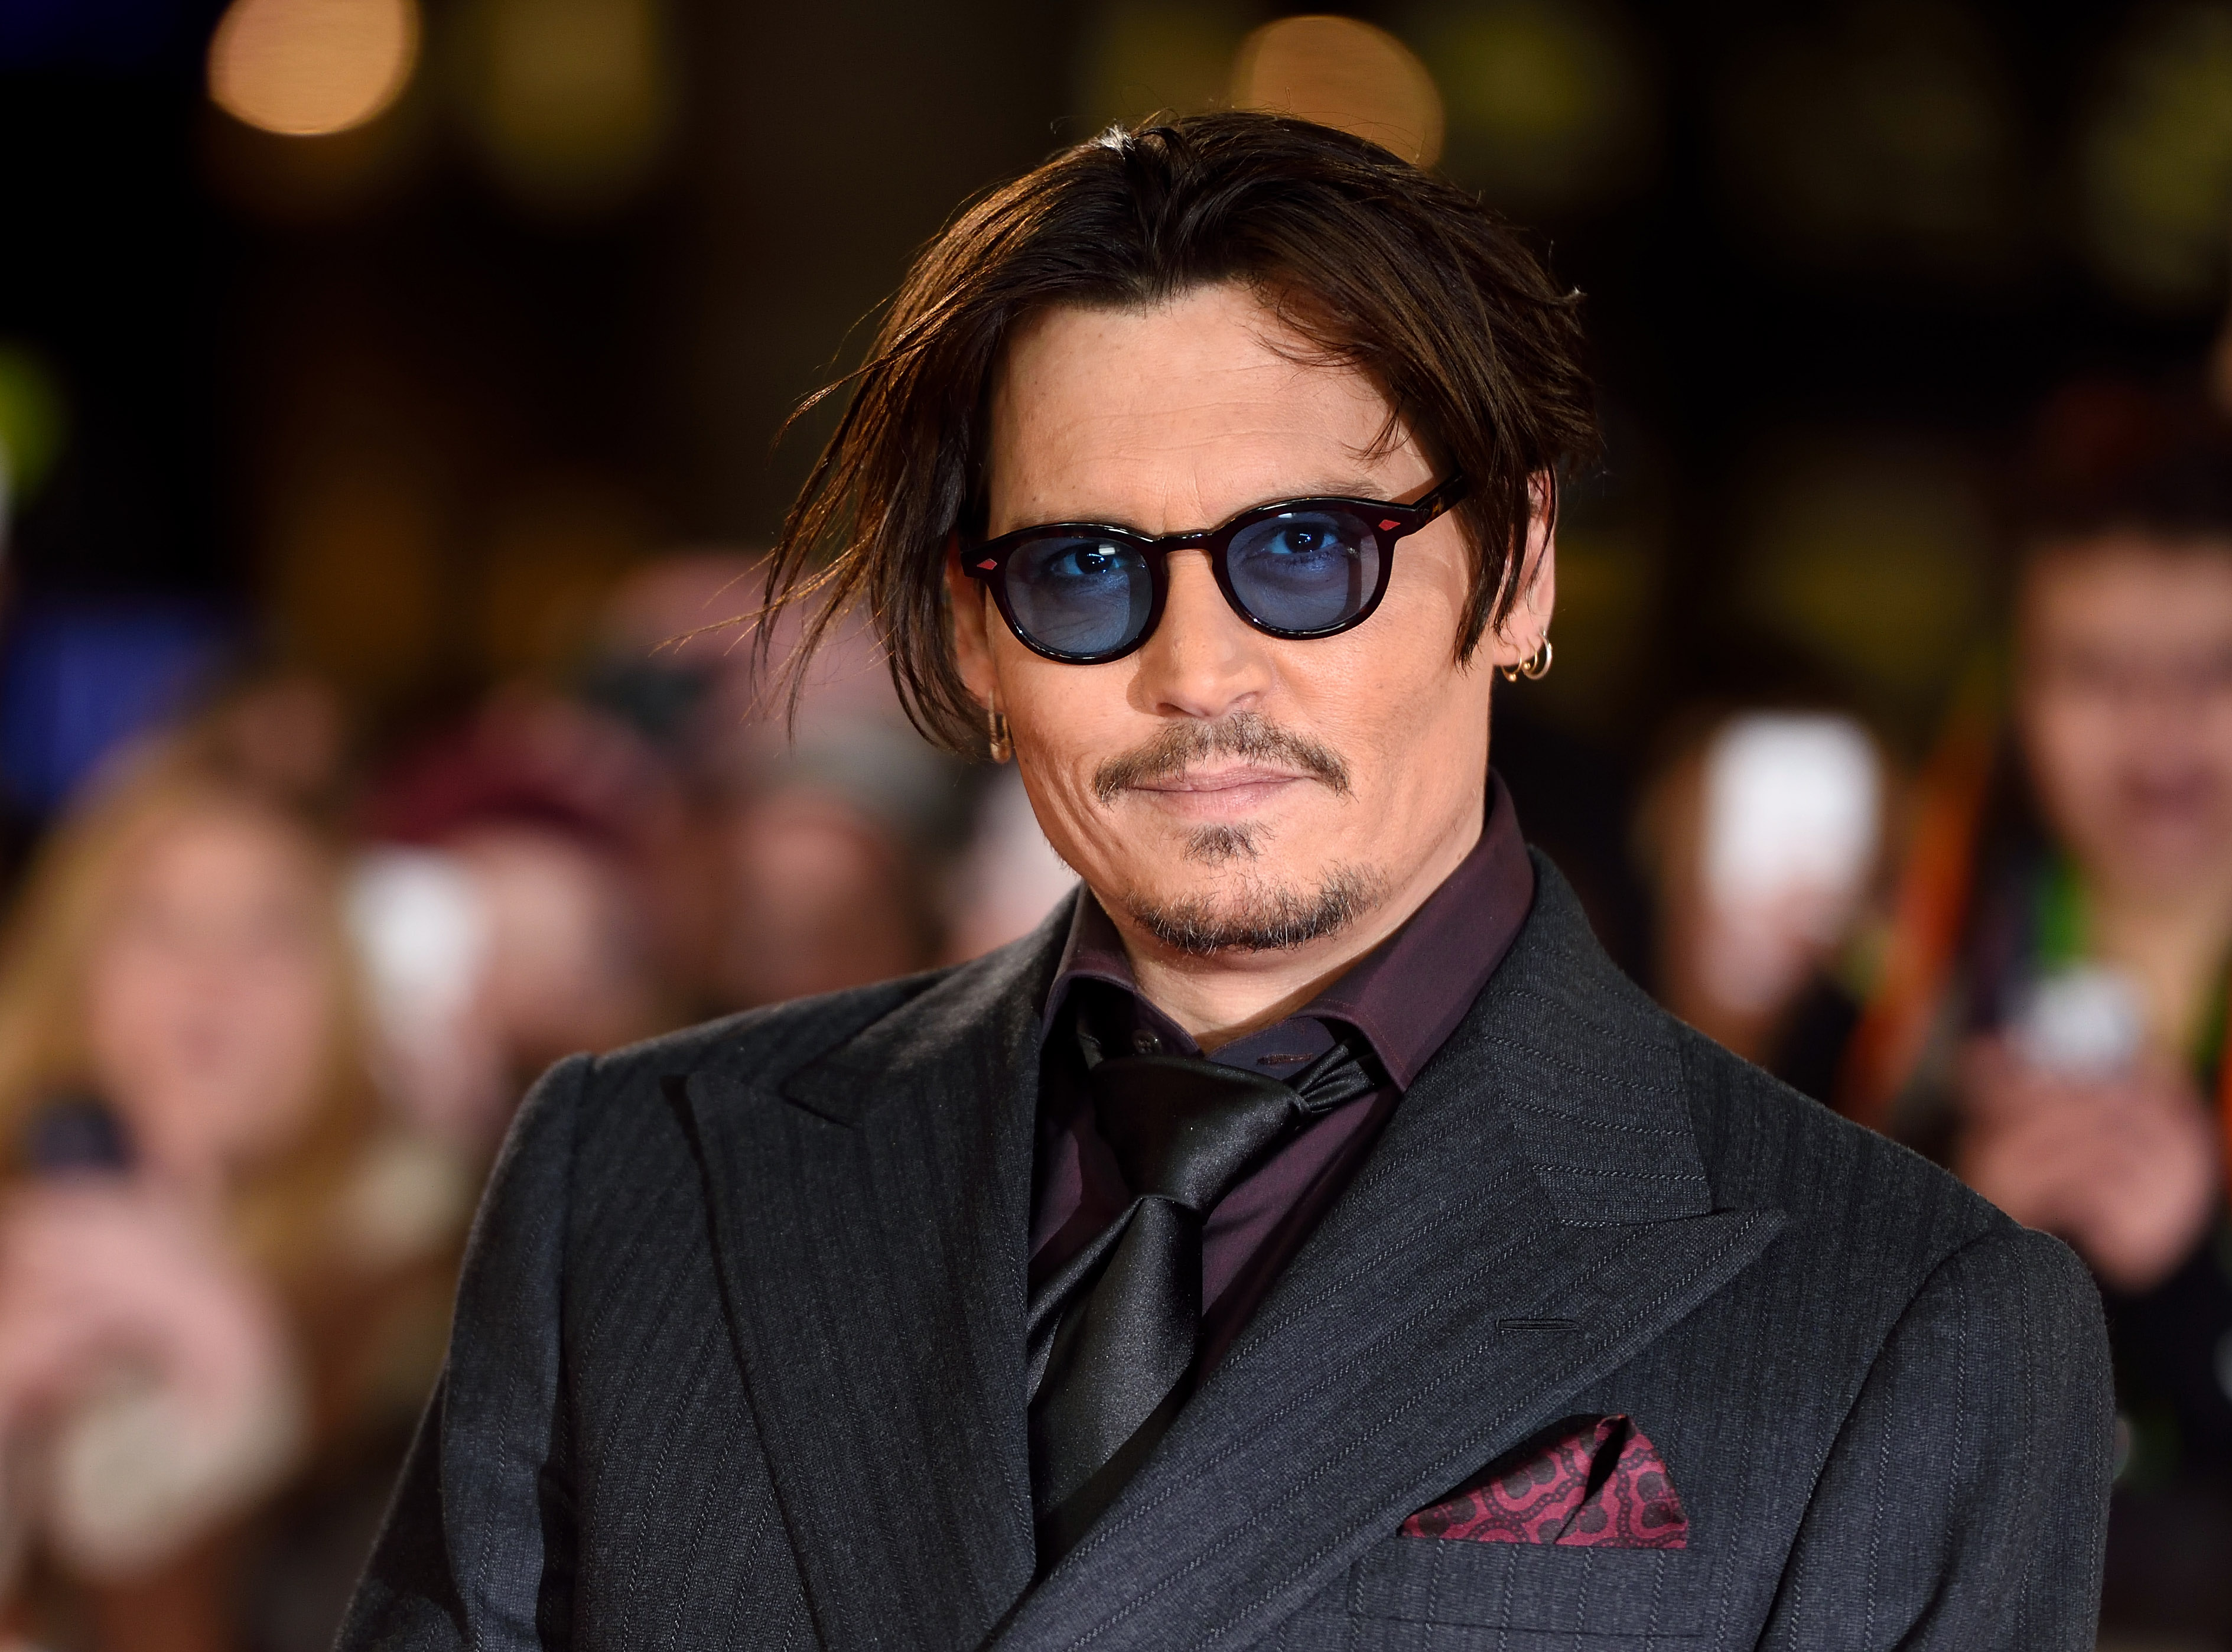 Johnny Depp Spends $30,000 a Month on Wine: Lawsuit | Fortune